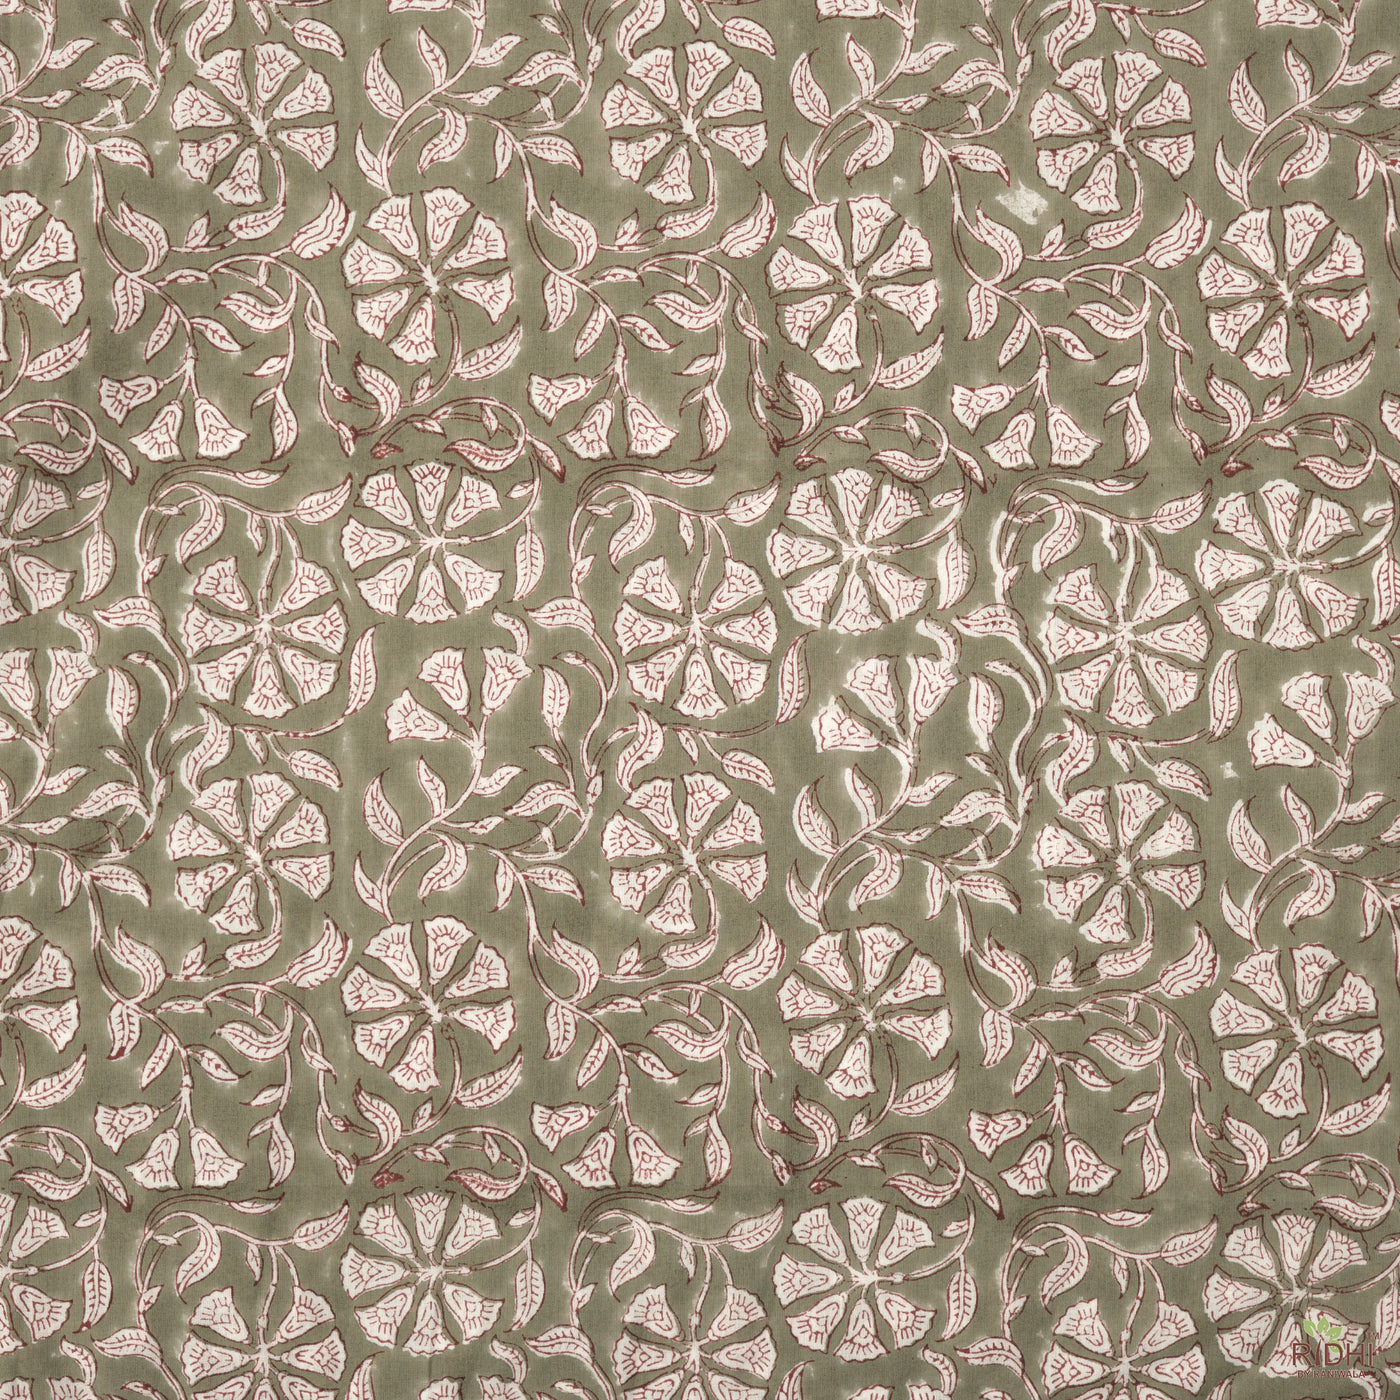 Artichoke Green and White Indian Floral Hand Block Printed 100% Pure Cotton Cloth, Fabric by the yard, Women's Clothing Curtains Duvet Cover